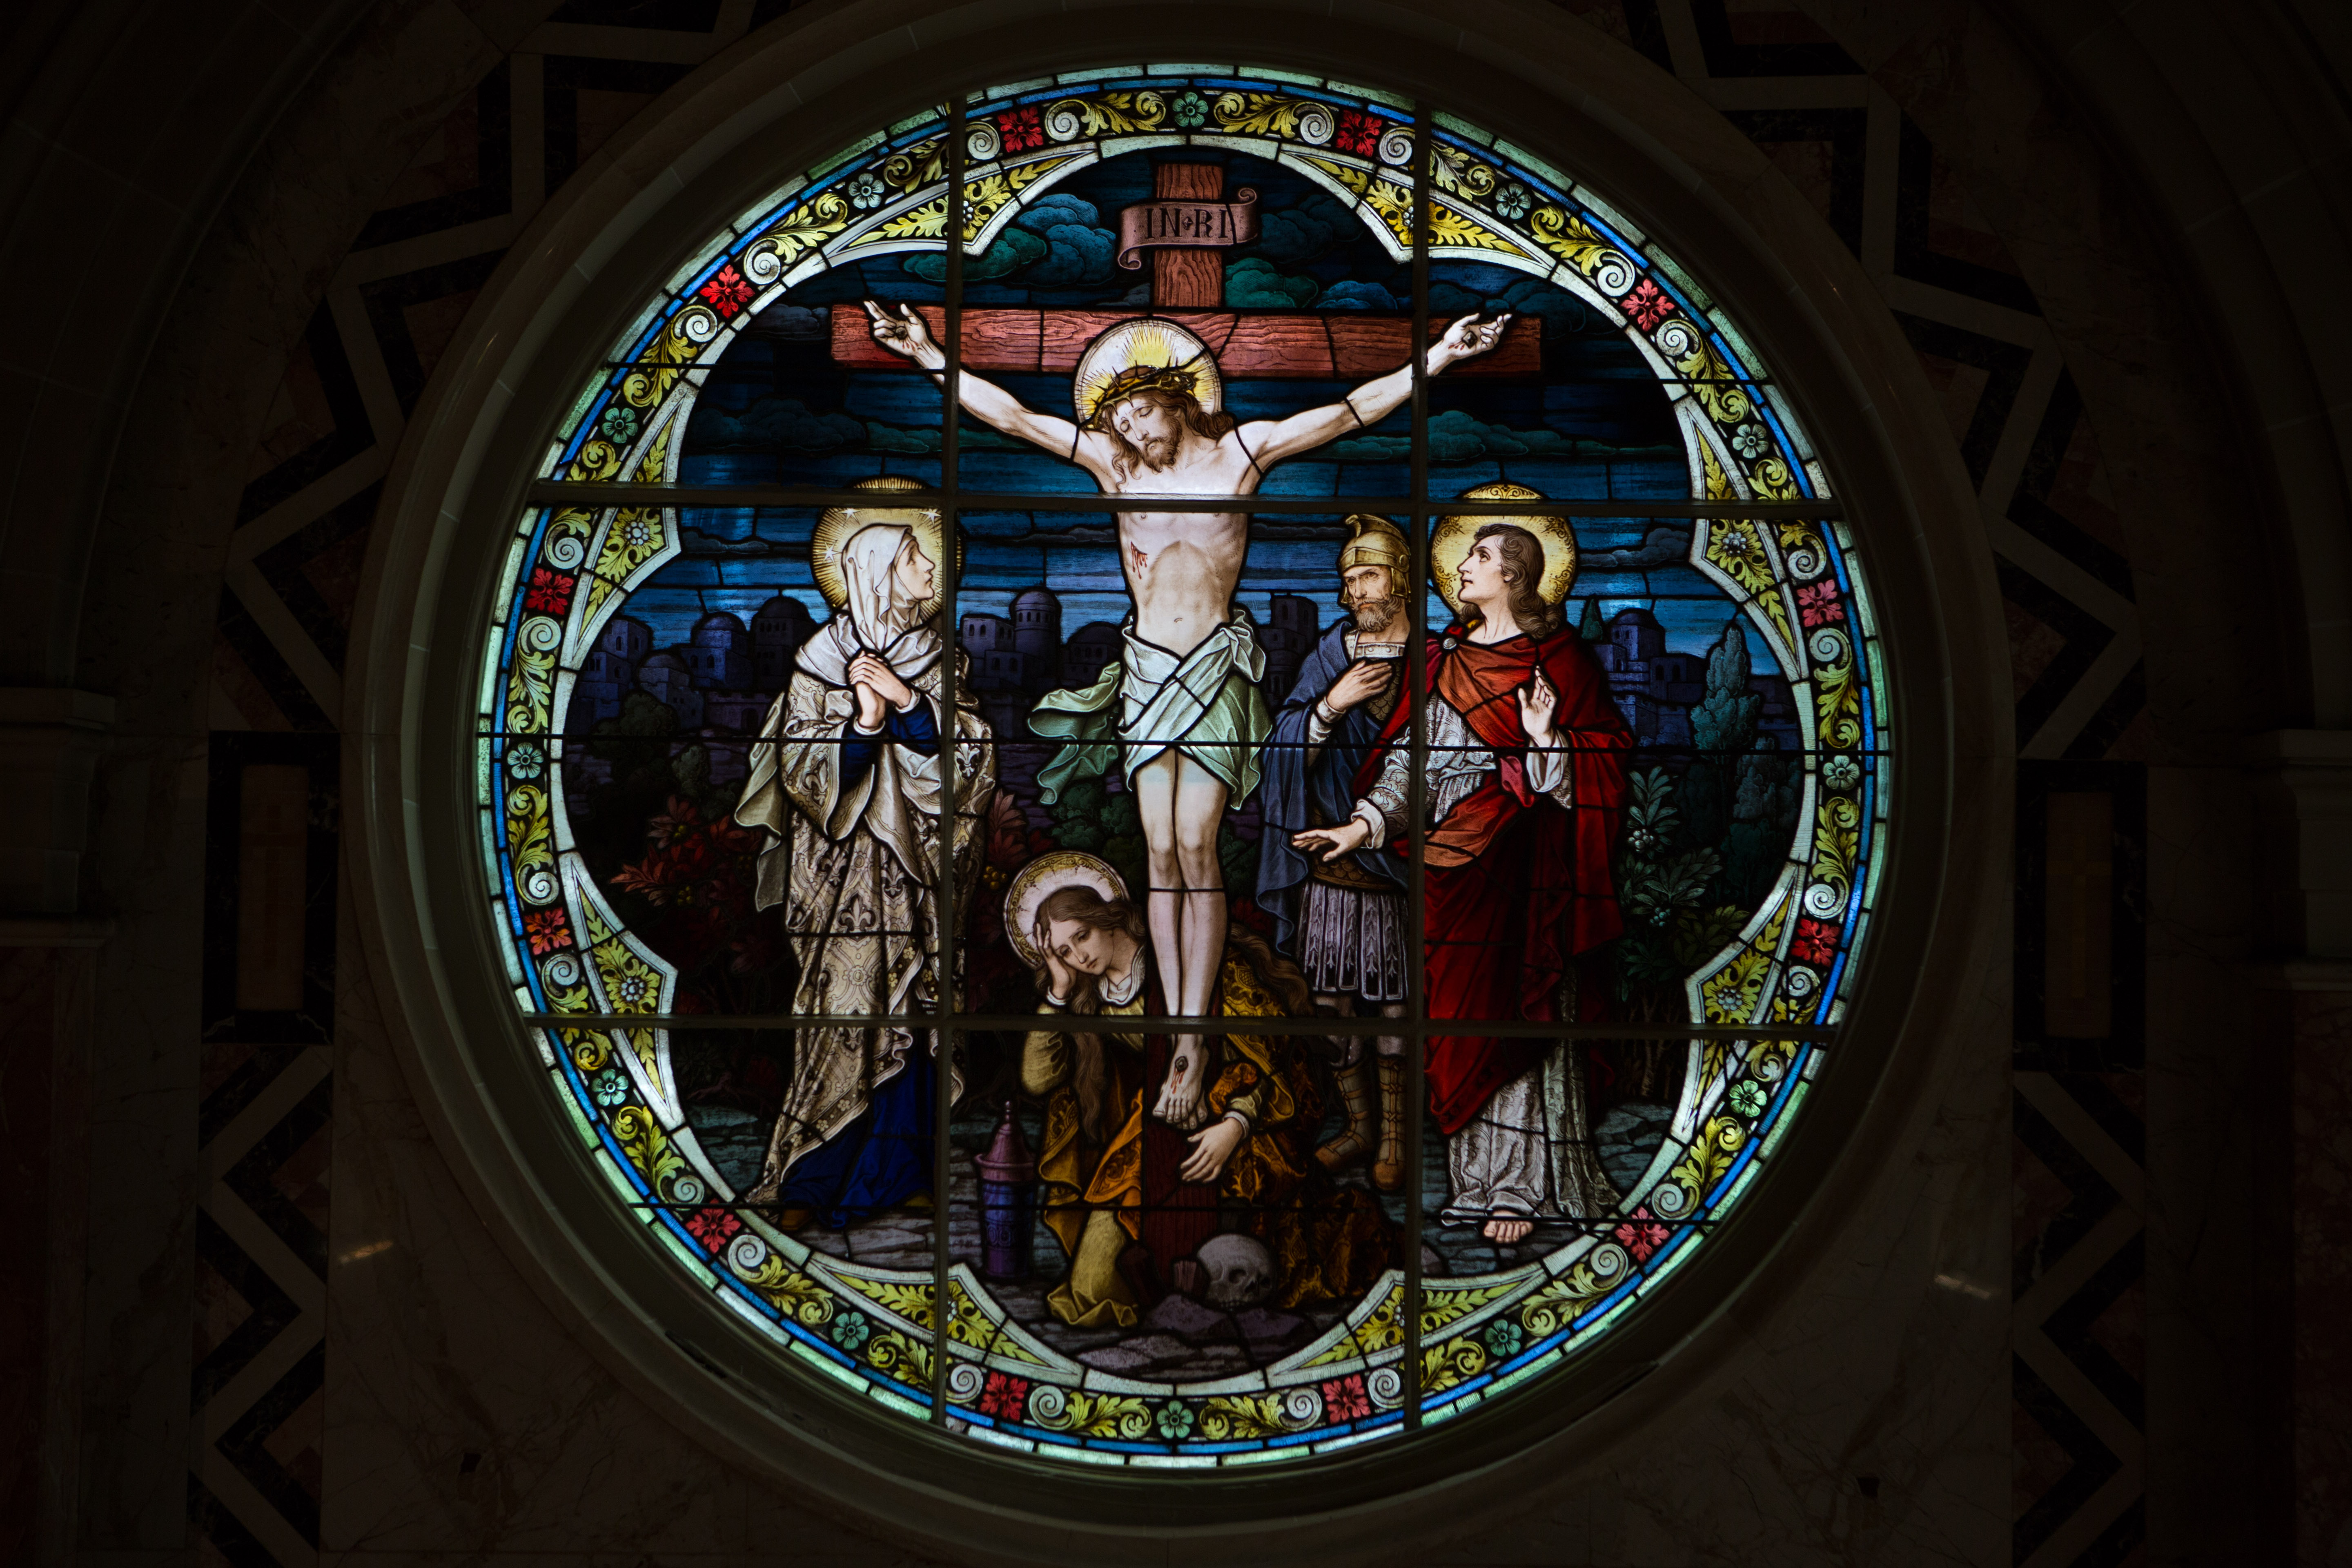 An image of a stained glass window depicting the crucifixion